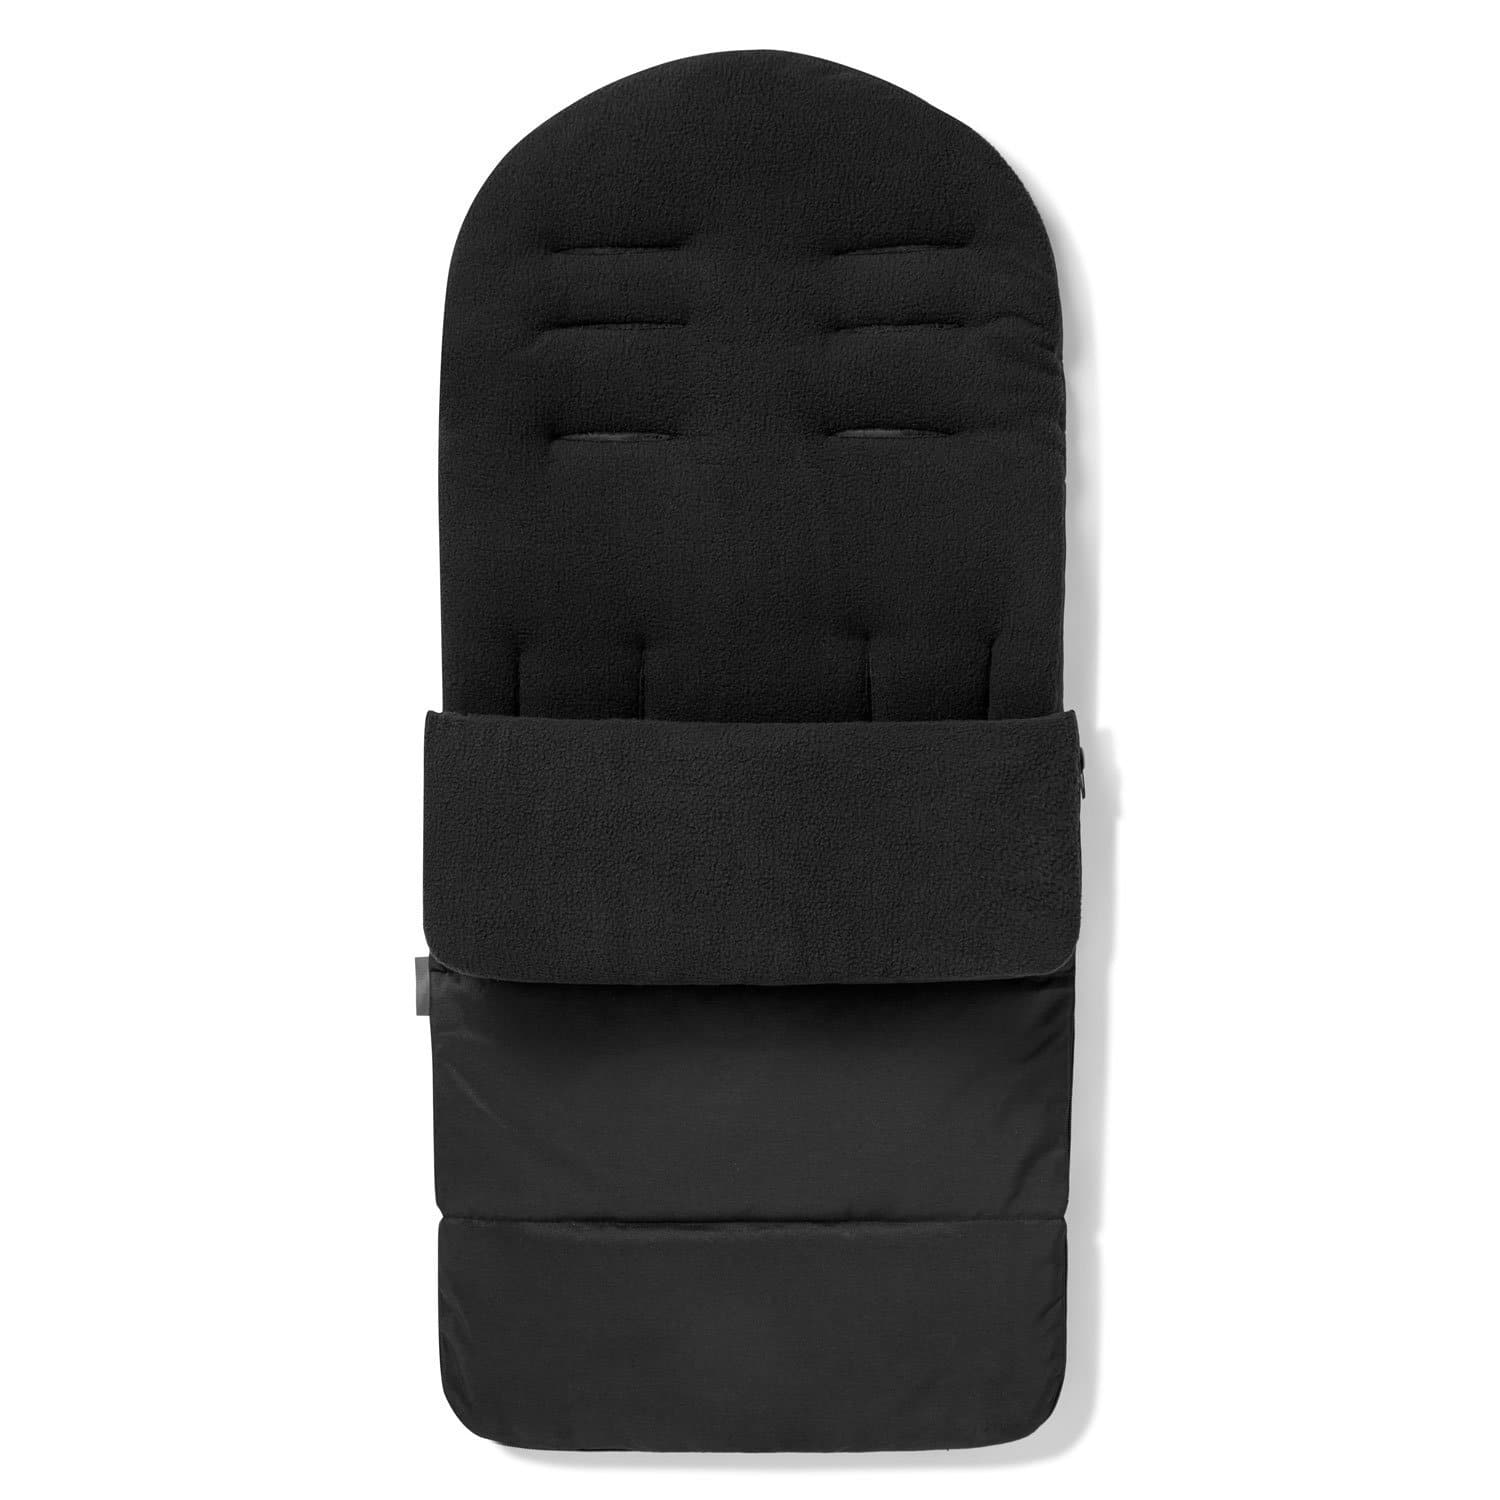 Premium Footmuff / Cosy Toes Compatible with Bebecar - Black Jack / Fits All Models | For Your Little One